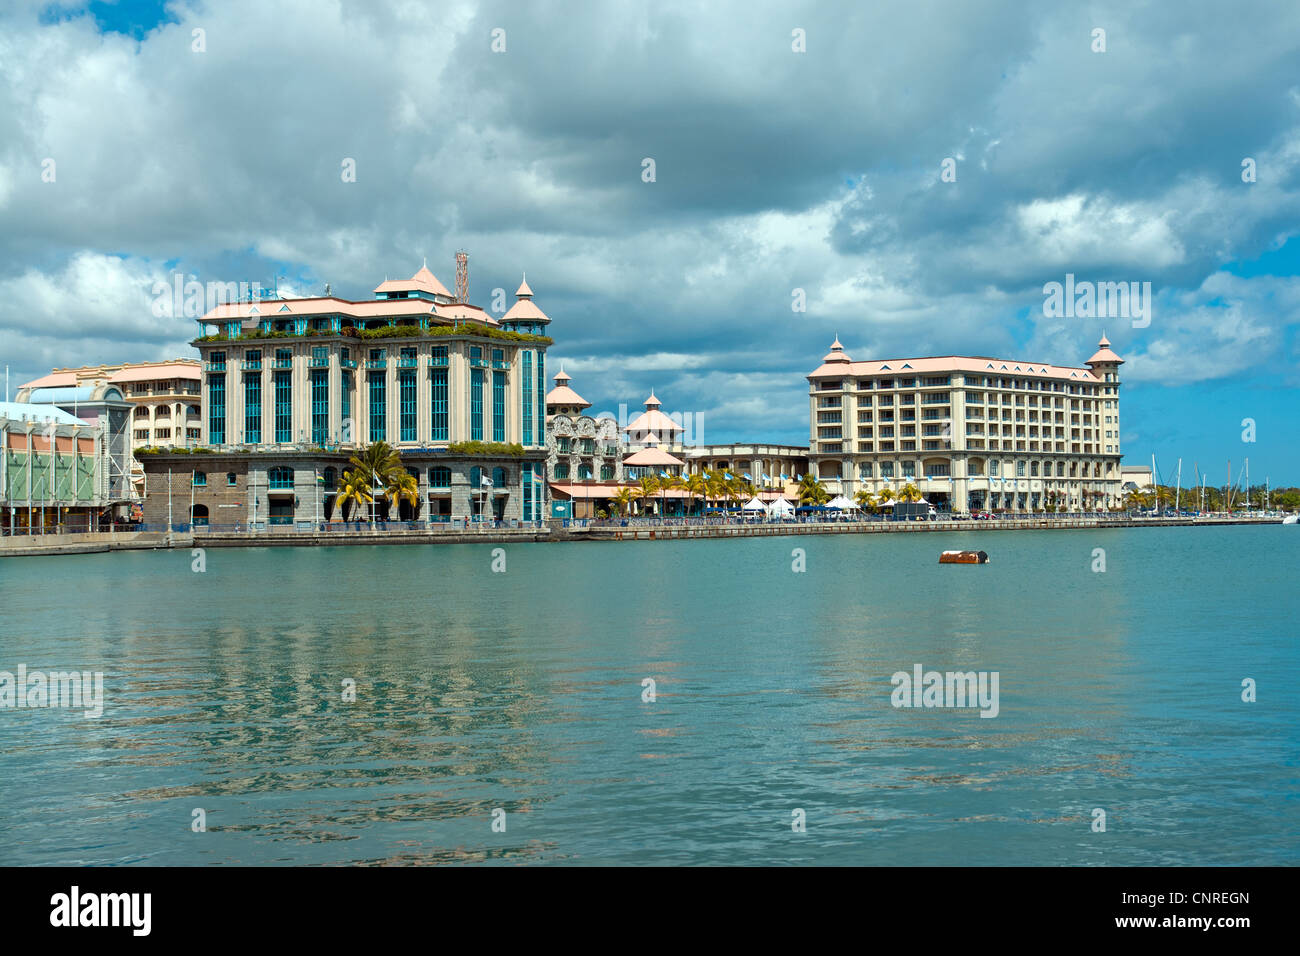 Le Caudan Waterfront shopping complex in Port Louis, Mauritius, an island in the Indian Ocean Stock Photo